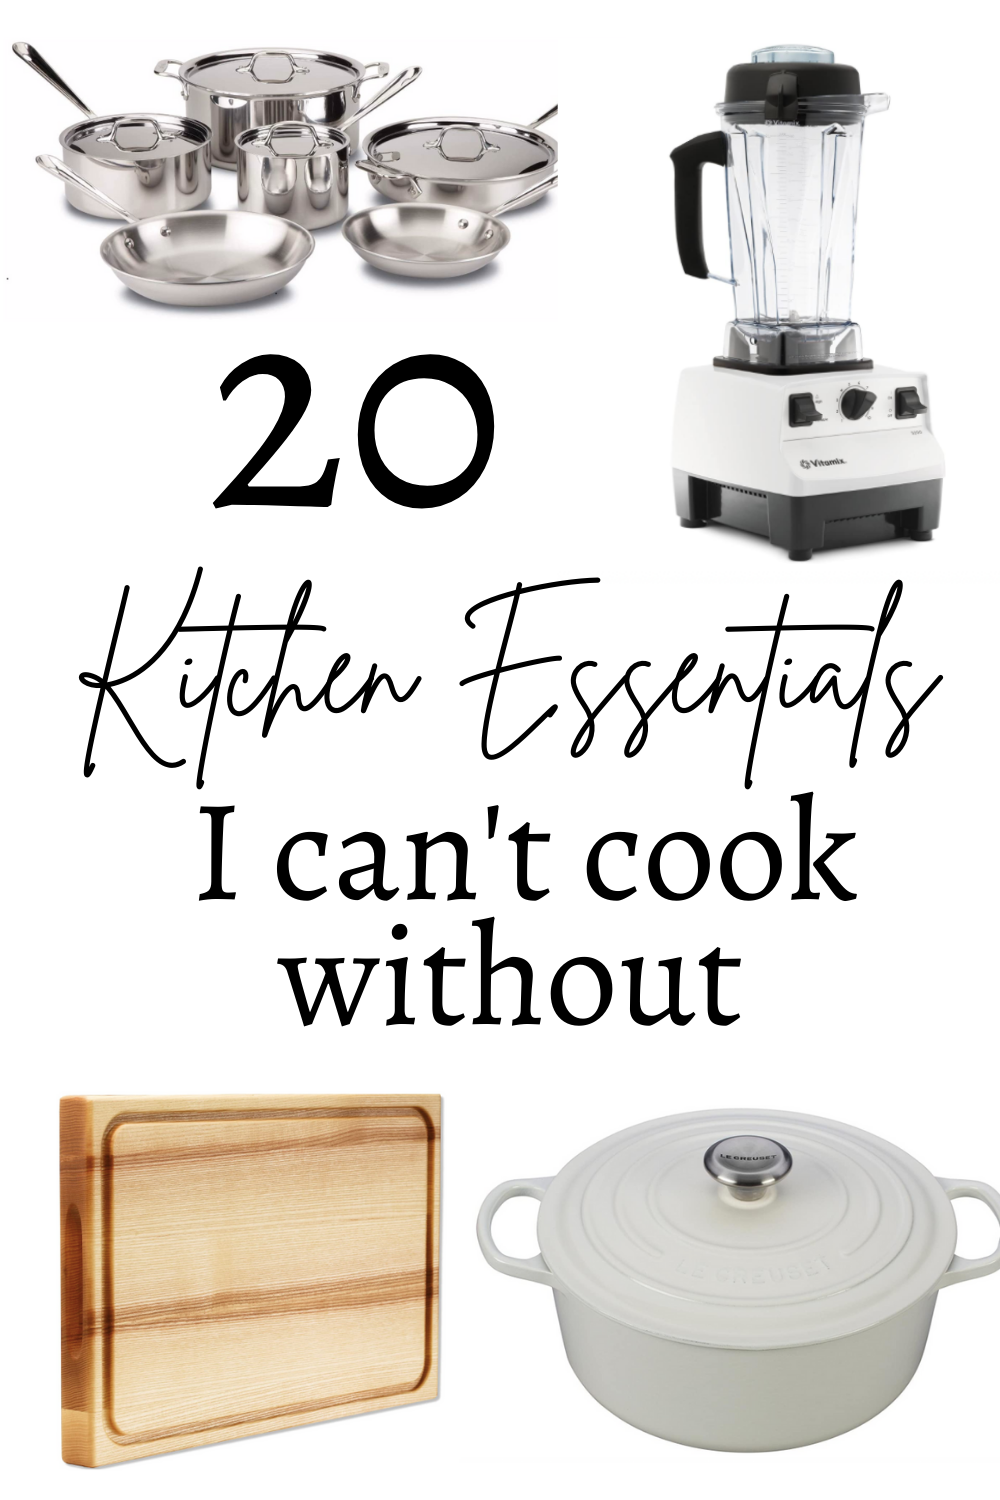 12 Kitchen Essentials You Didn't Know You Need